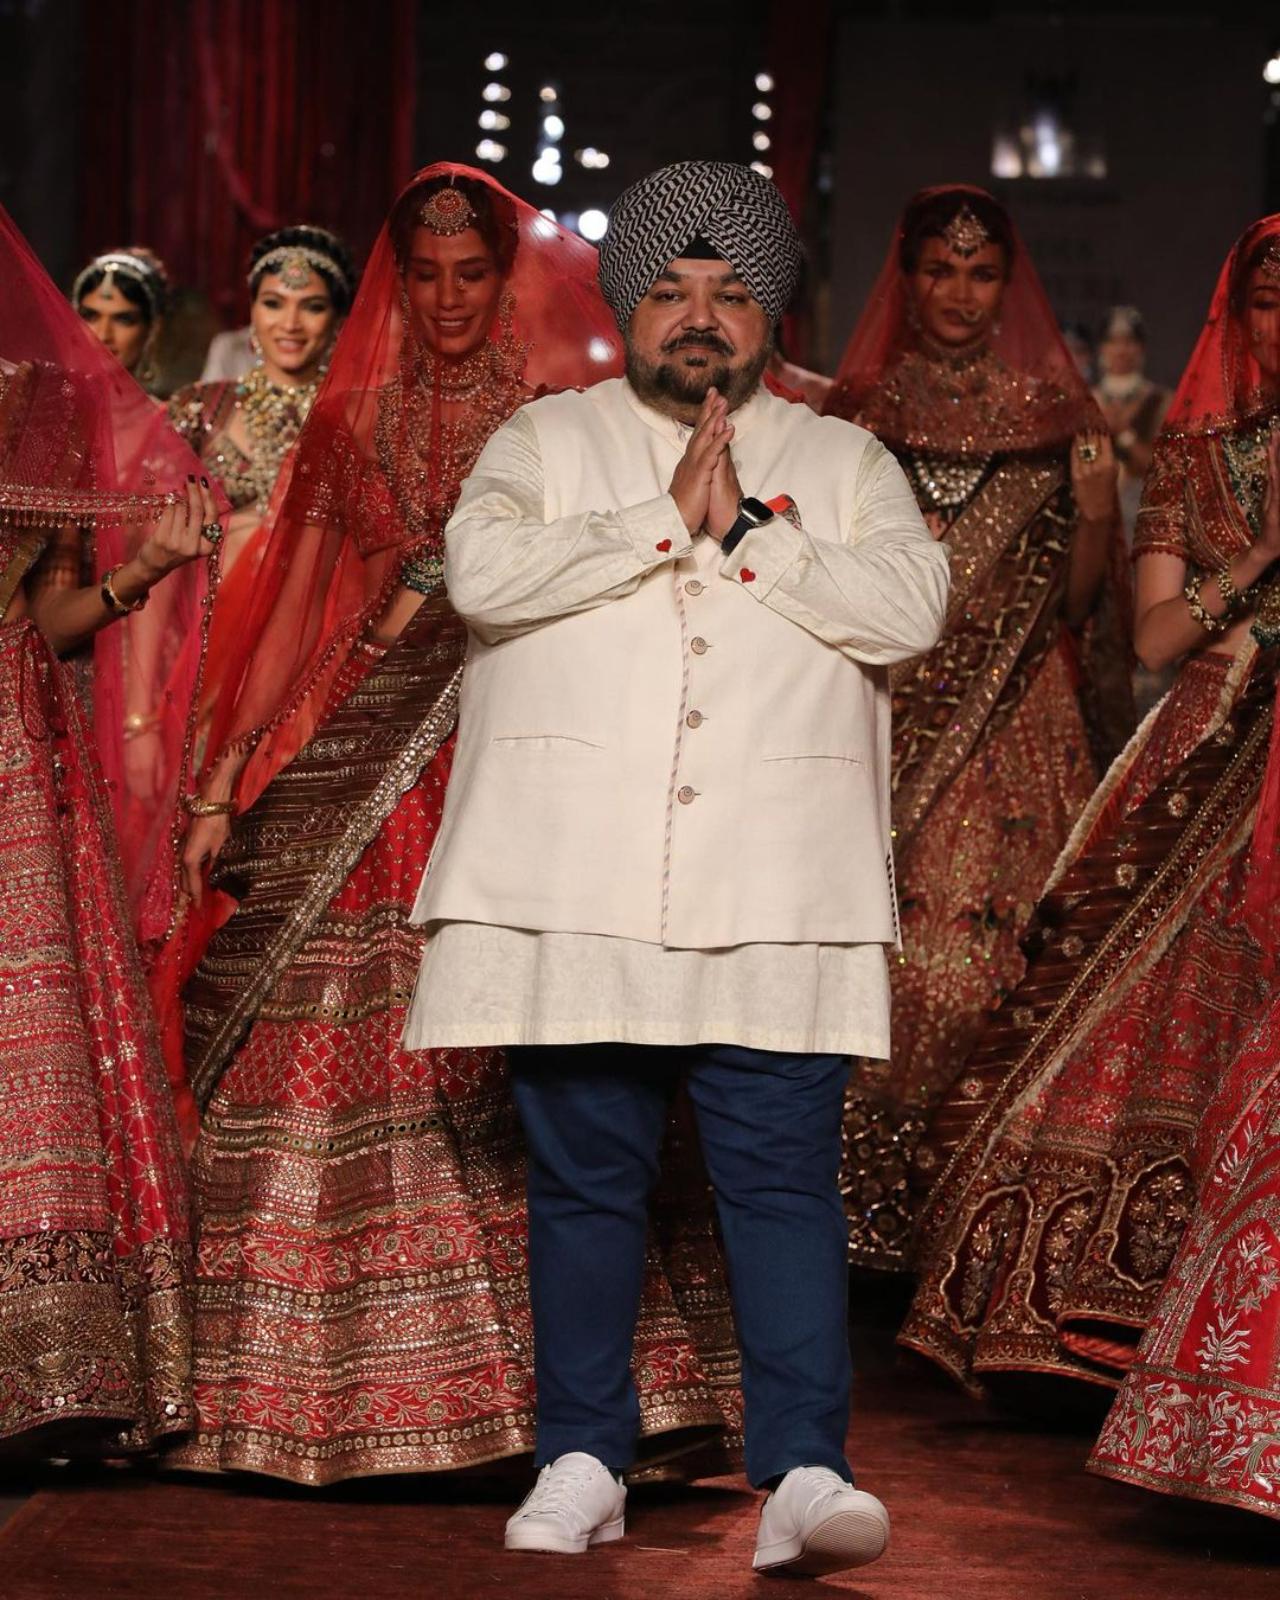 Couturier JJ Valaya presented his collection ‘Baroda.’ The collection exuded royalty energy - it drew inspiration from Kutch and Mughal motifs. It also sought inspiration from the pattersn of Portuguese Azulejos tiles